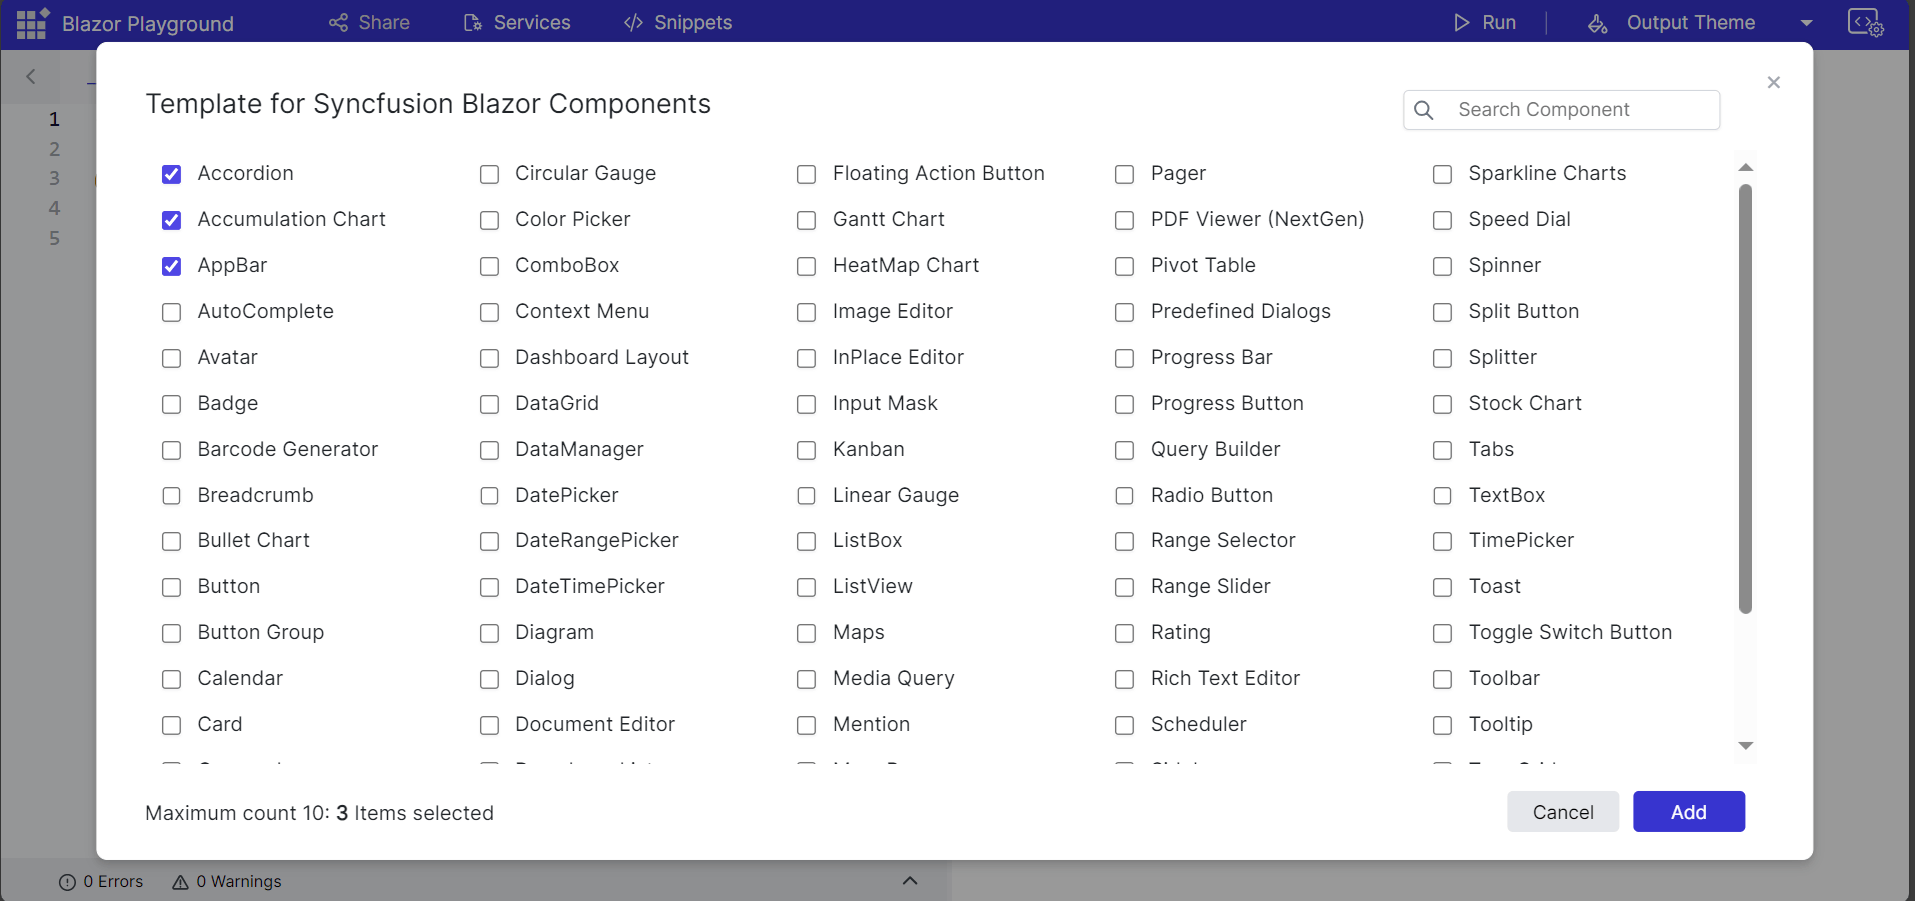 Blazor Playground with selecting a component